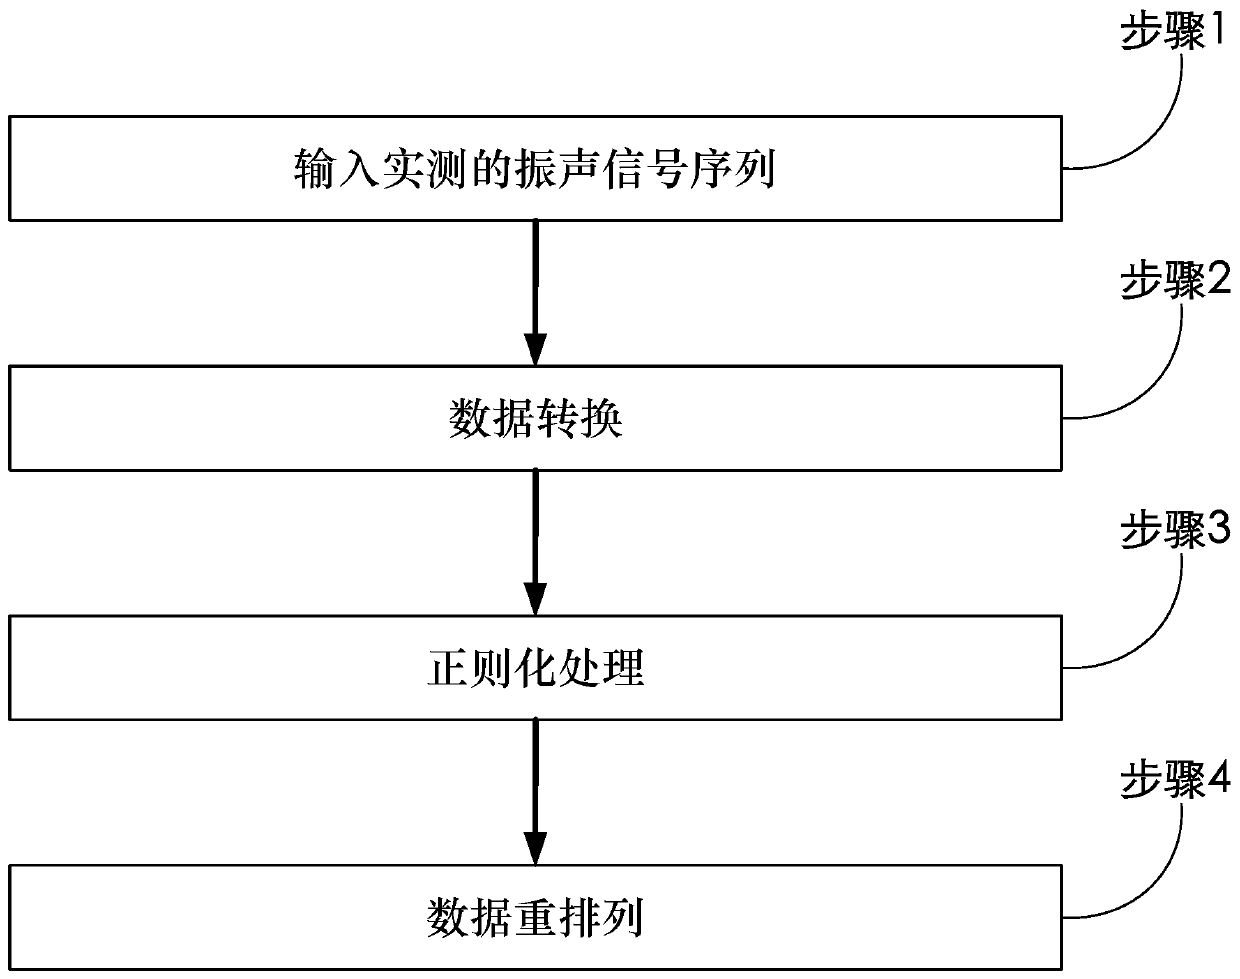 Transformer operation state vibration sound detection signal reconstruction method and system using data regularization